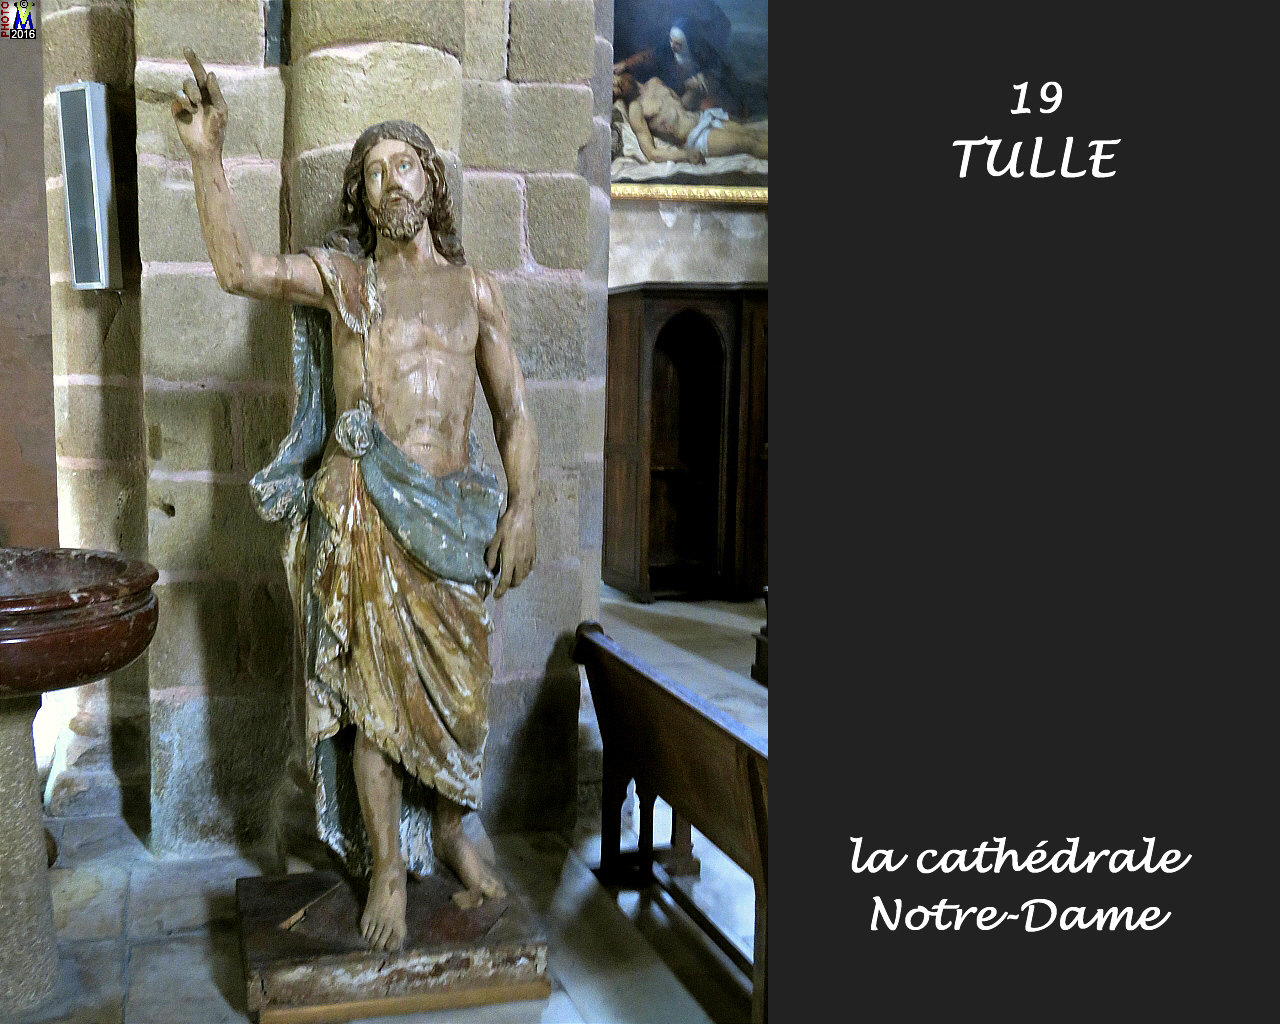 19TULLE_cathedrale_252.jpg